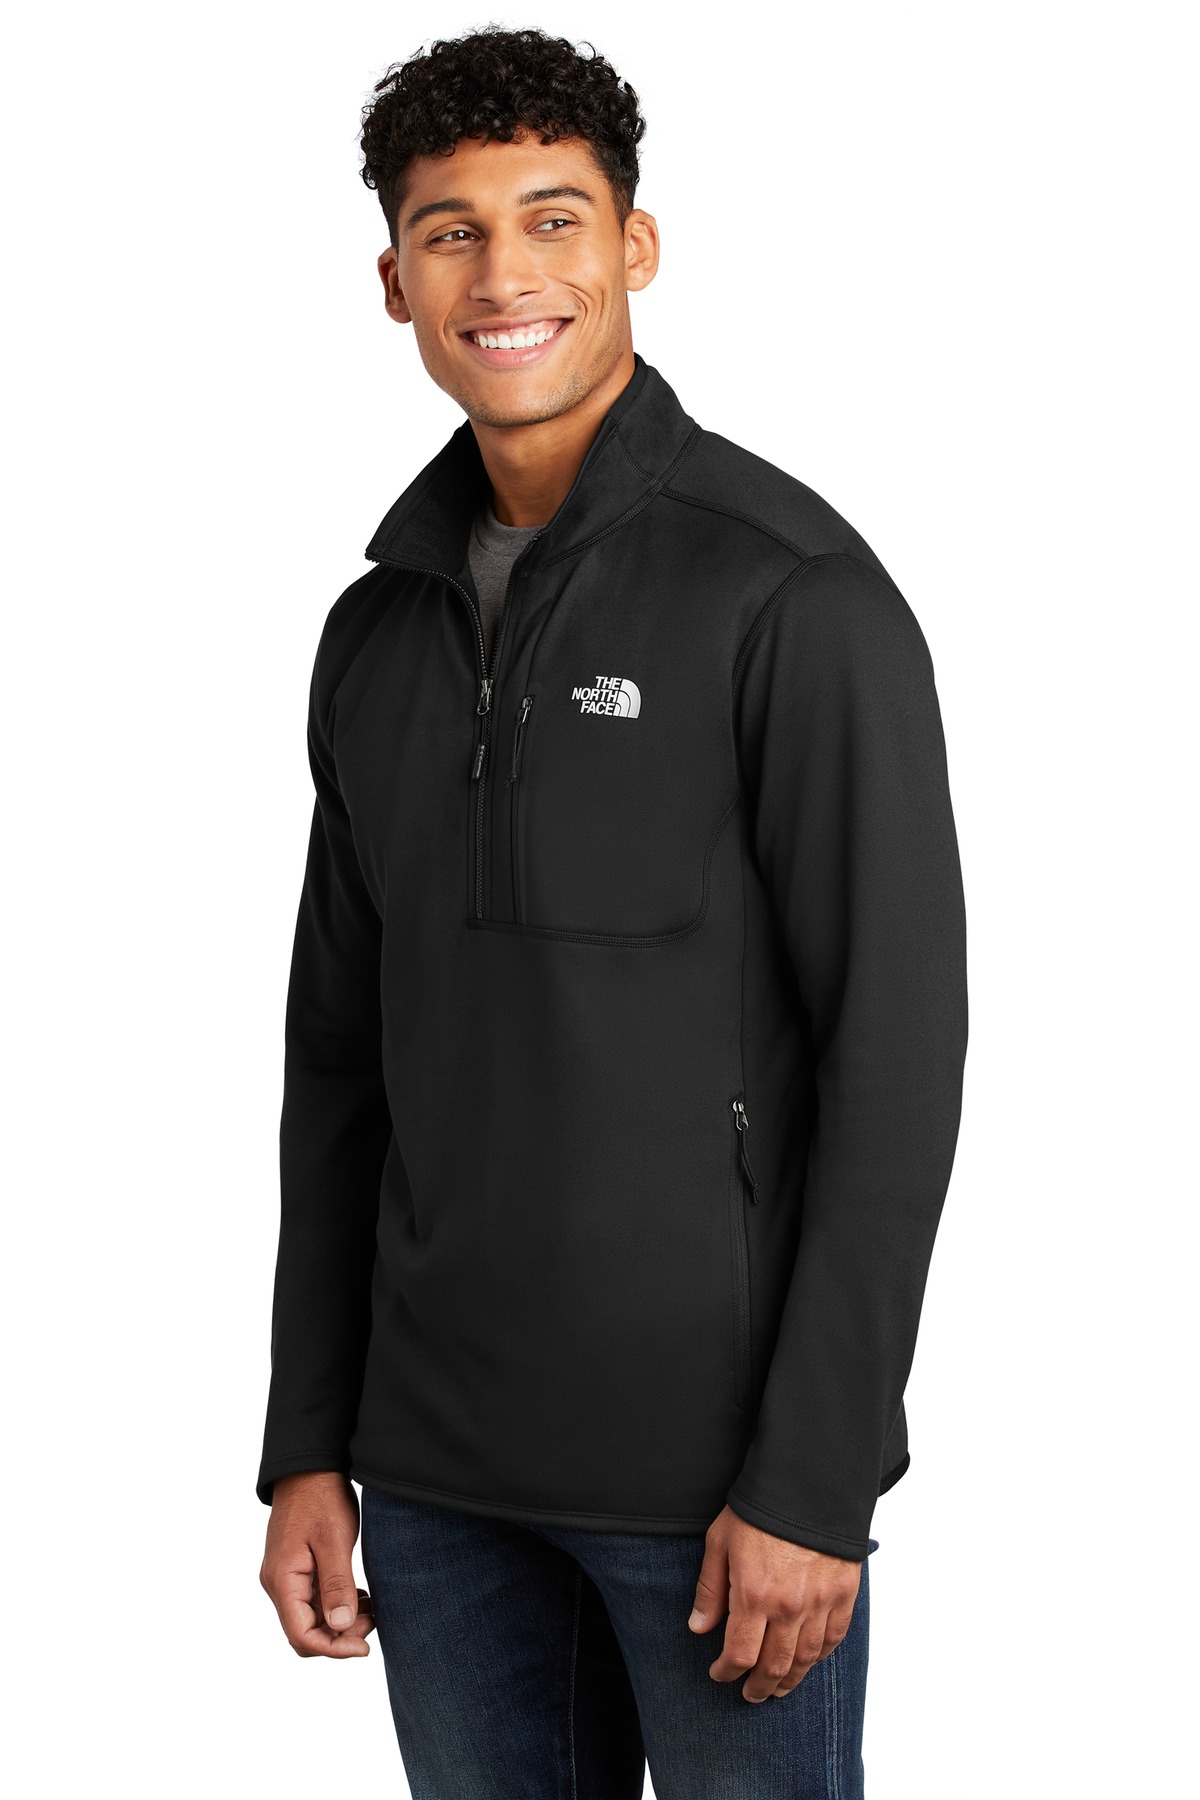 The North Face Skyline 1/2-Zip Fleece NF0A47F7 | Blank Apparel by ZOME